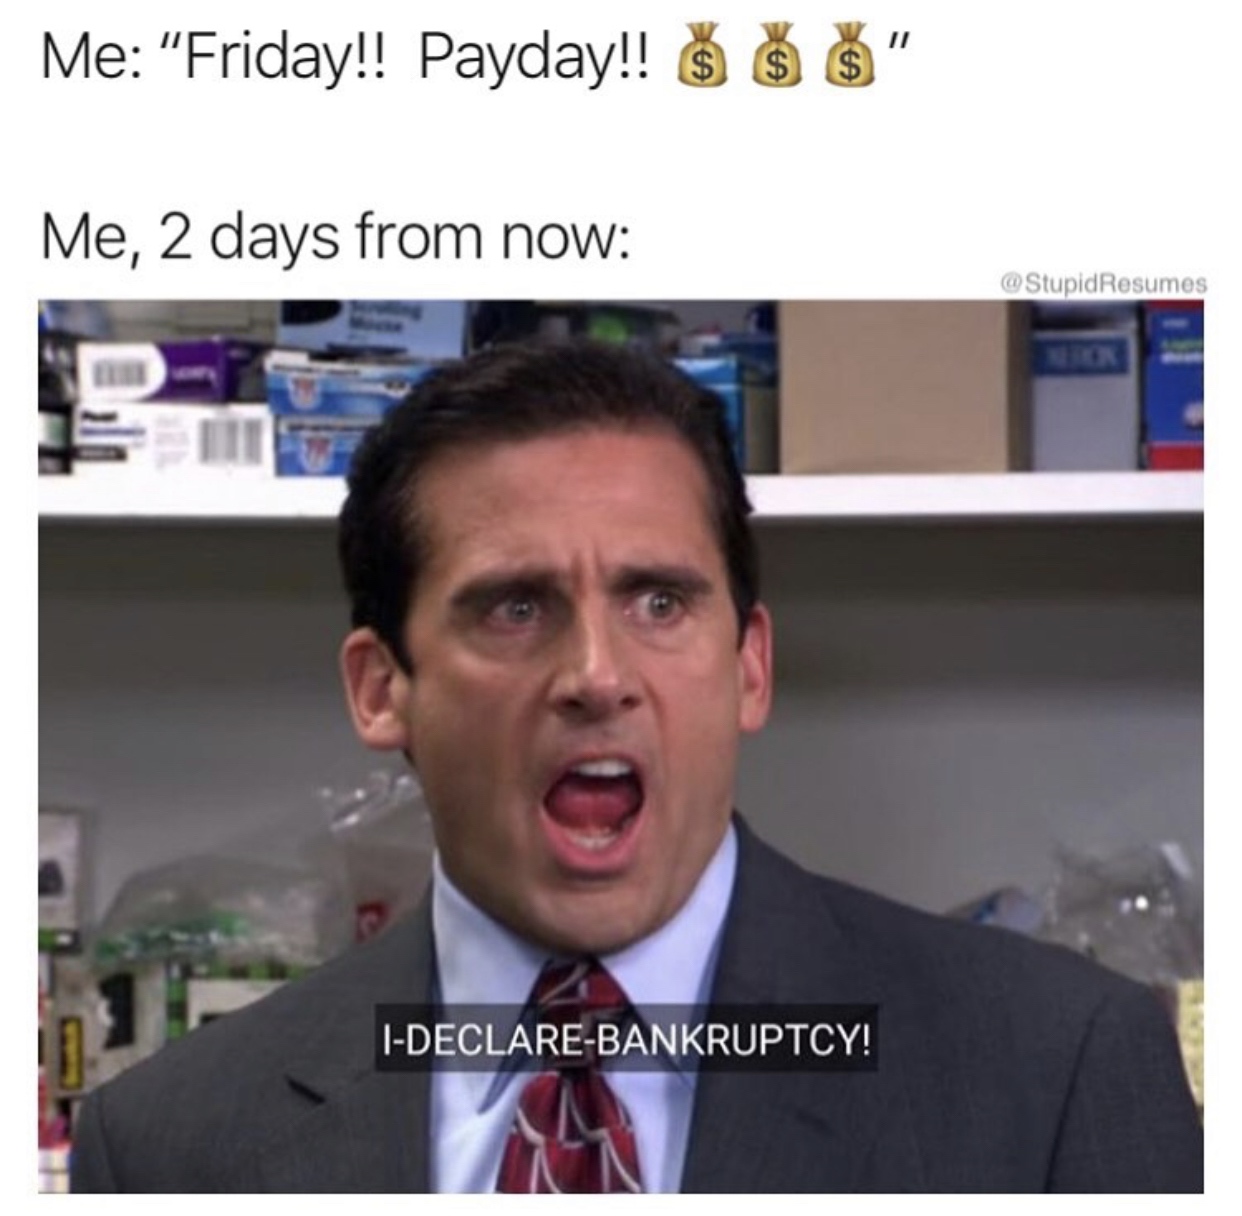 michael scott i declare bankruptcy - Me "Friday!! Payday!! $ $ $". Me, 2 days from now Resumes IDeclareBankruptcy!